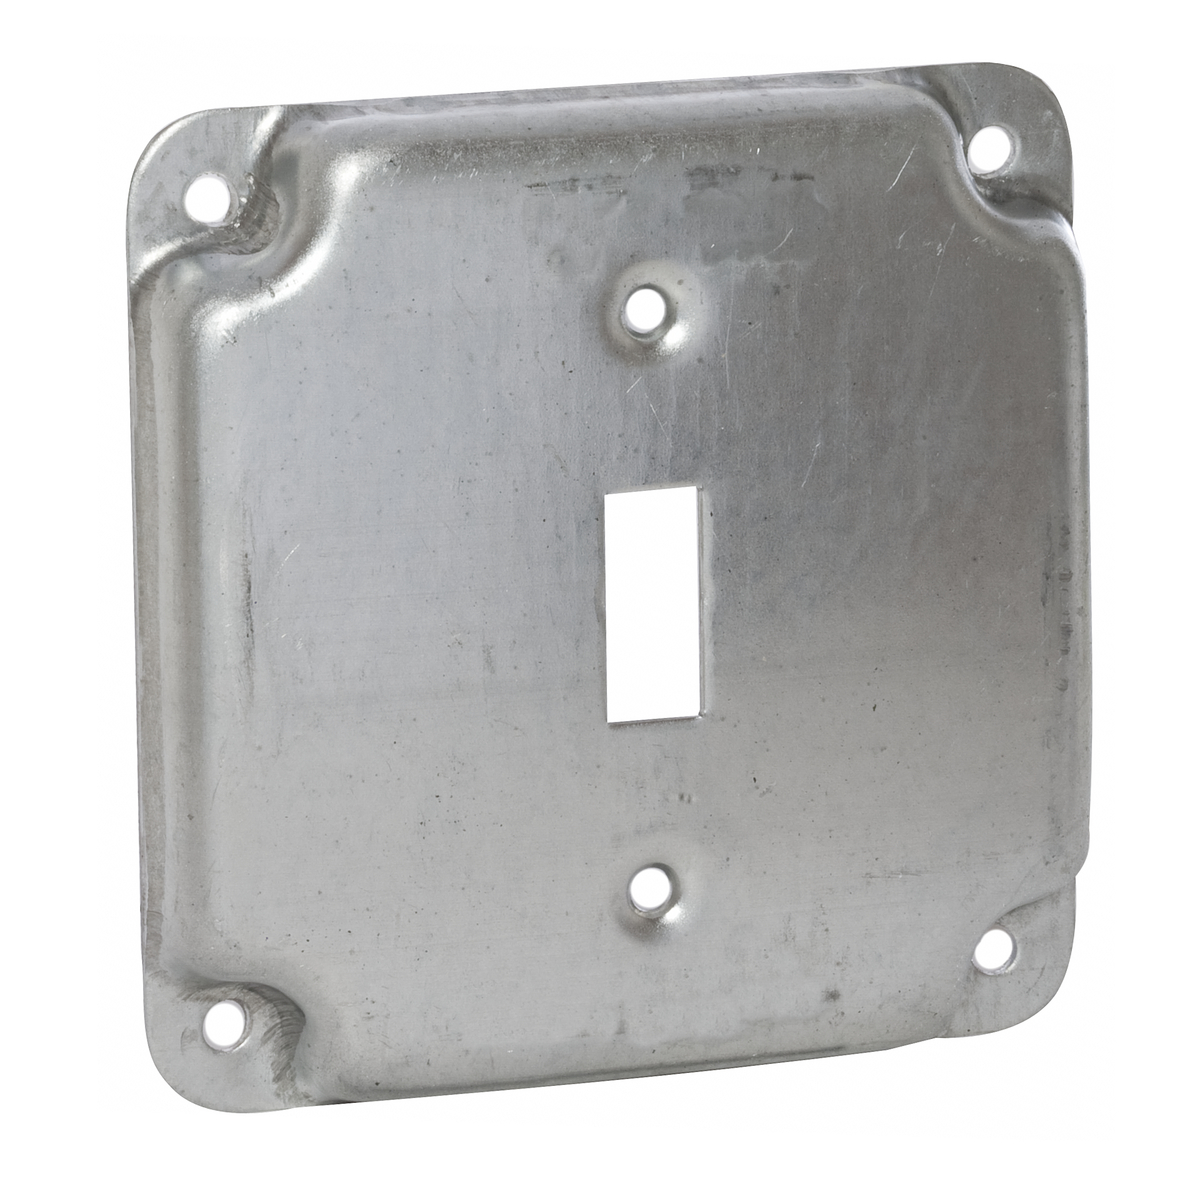 4 In. Square Exposed Work Covers - Raised 1/2 In., 1 Toggle Switch